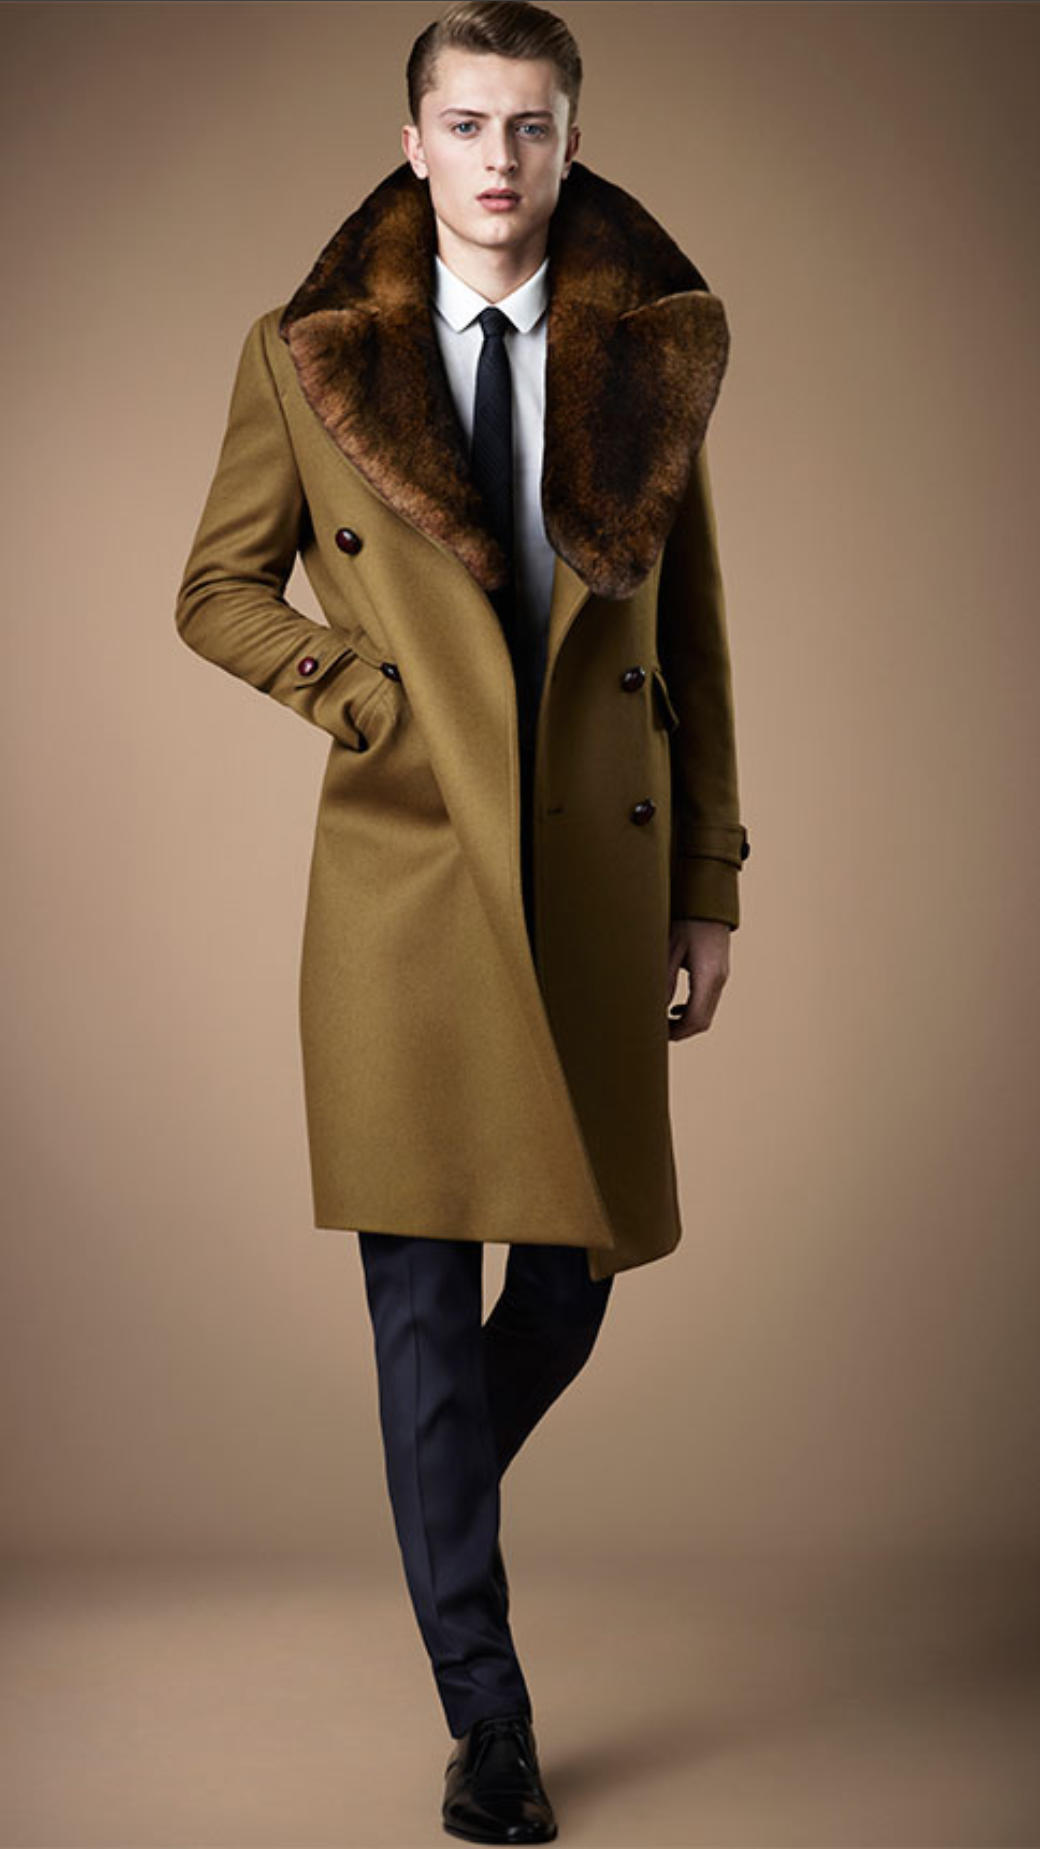 Lyst - Burberry Rabbit-Fur and Wool Military Coat in Brown for Men